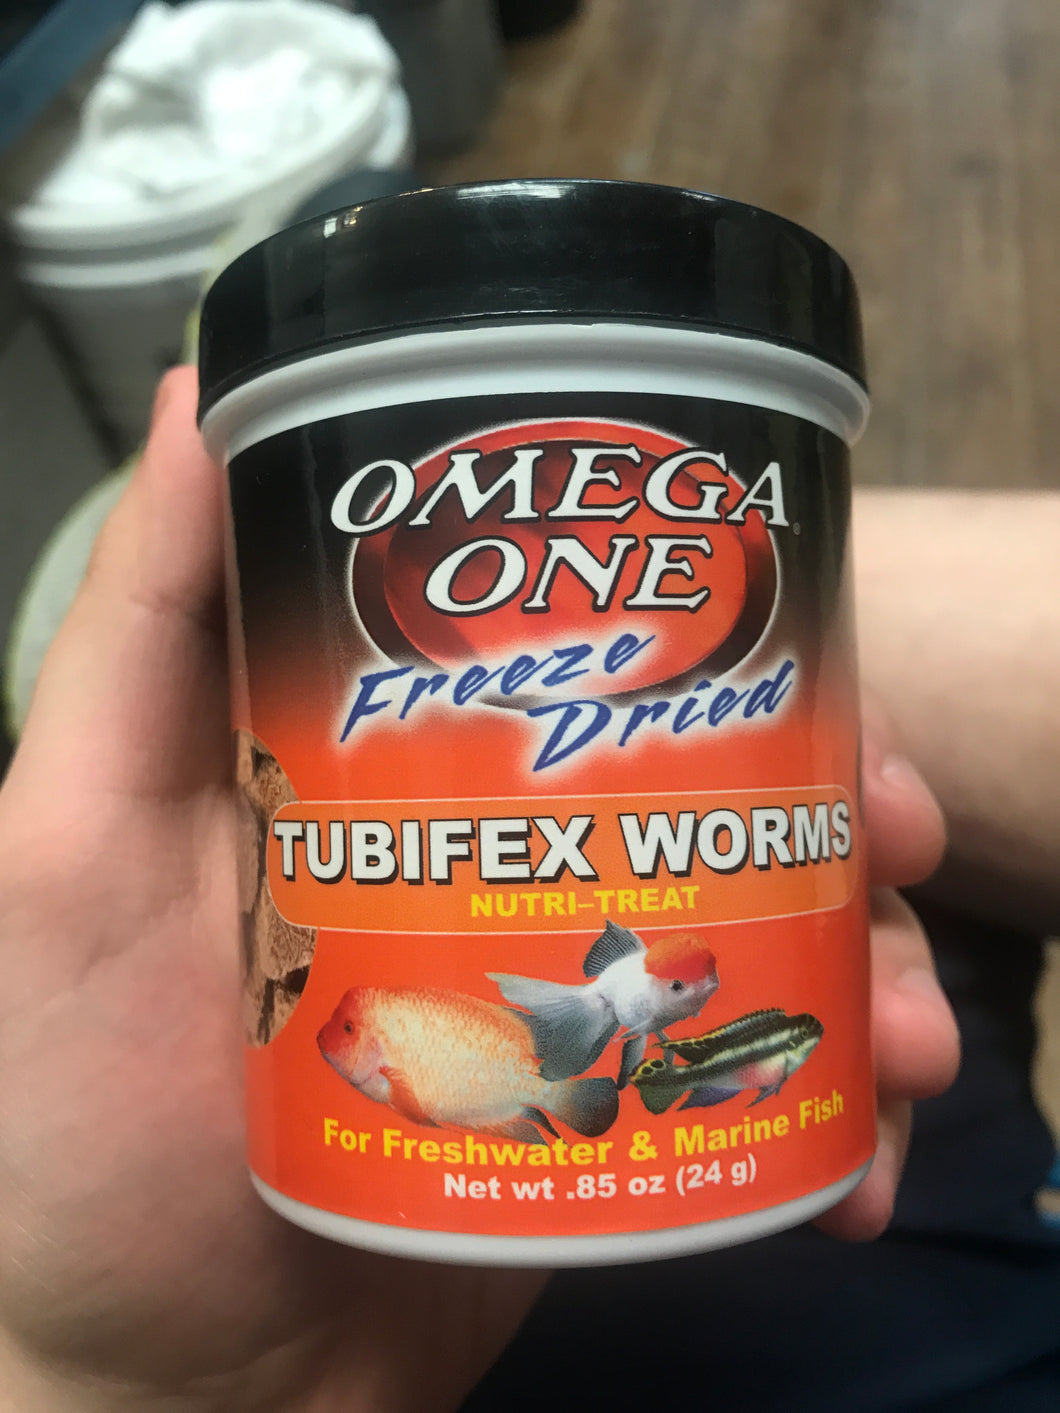 Omega One Freeze Dried Tubifex Worms